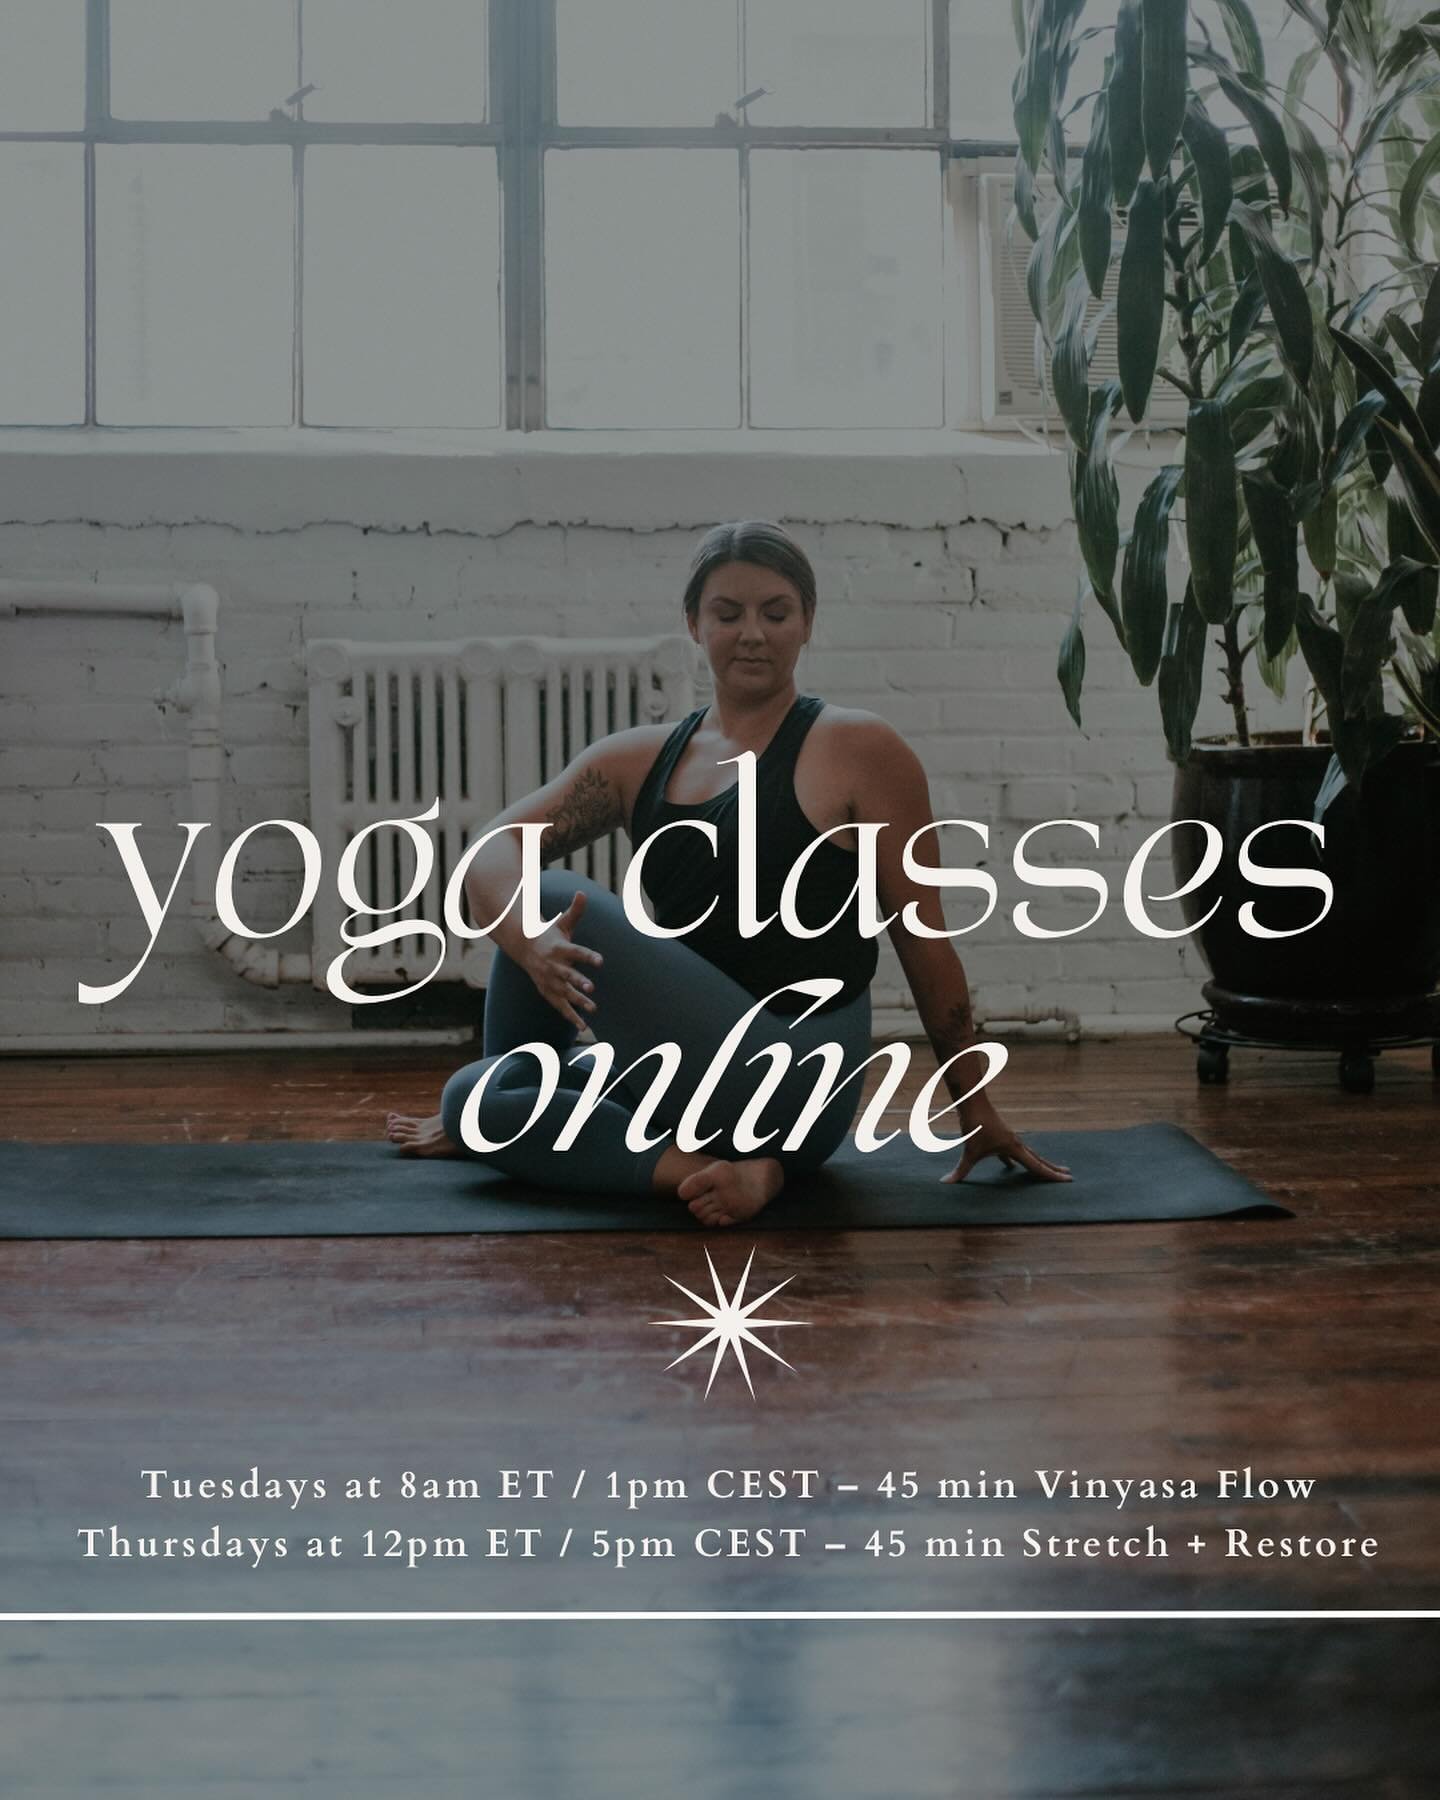 ✨Weekly Virtual Yoga Classes✨

I am excited to share my weekly virtual yoga offerings with all of you! 

Classes will be hosted twice a week through zoom and will be recorded every single time for you to use at your own convenience. 

These classes w